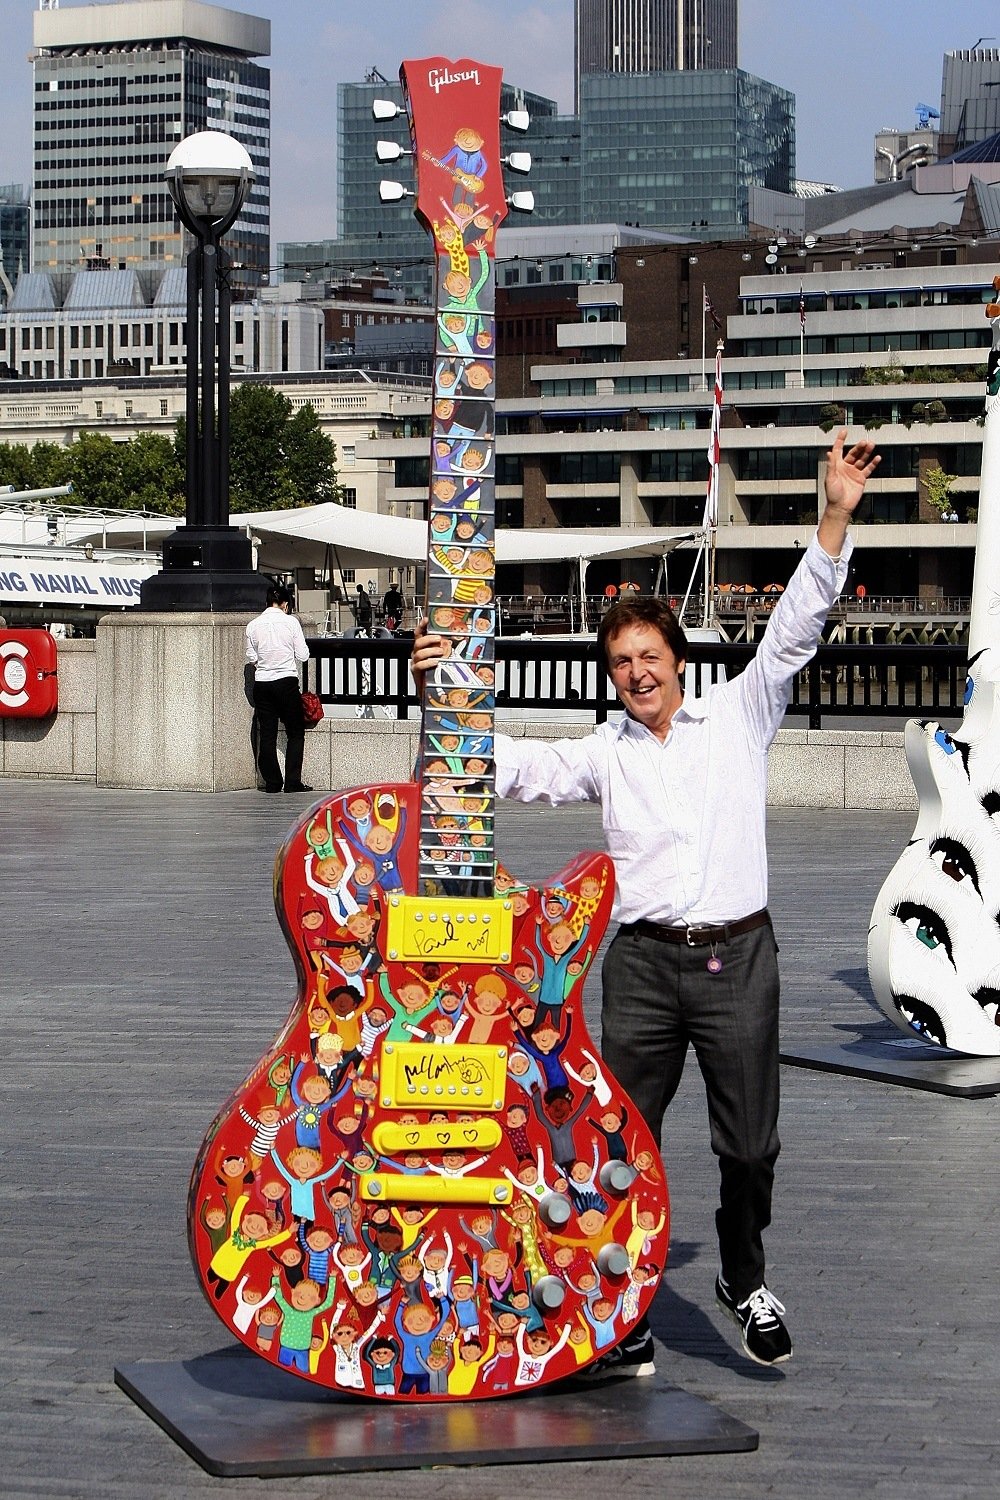 Sir Paul McCartney Signs his ten foot Gibson Les Paul sculpture at More London Riverside by City Hall on September 12, 2007